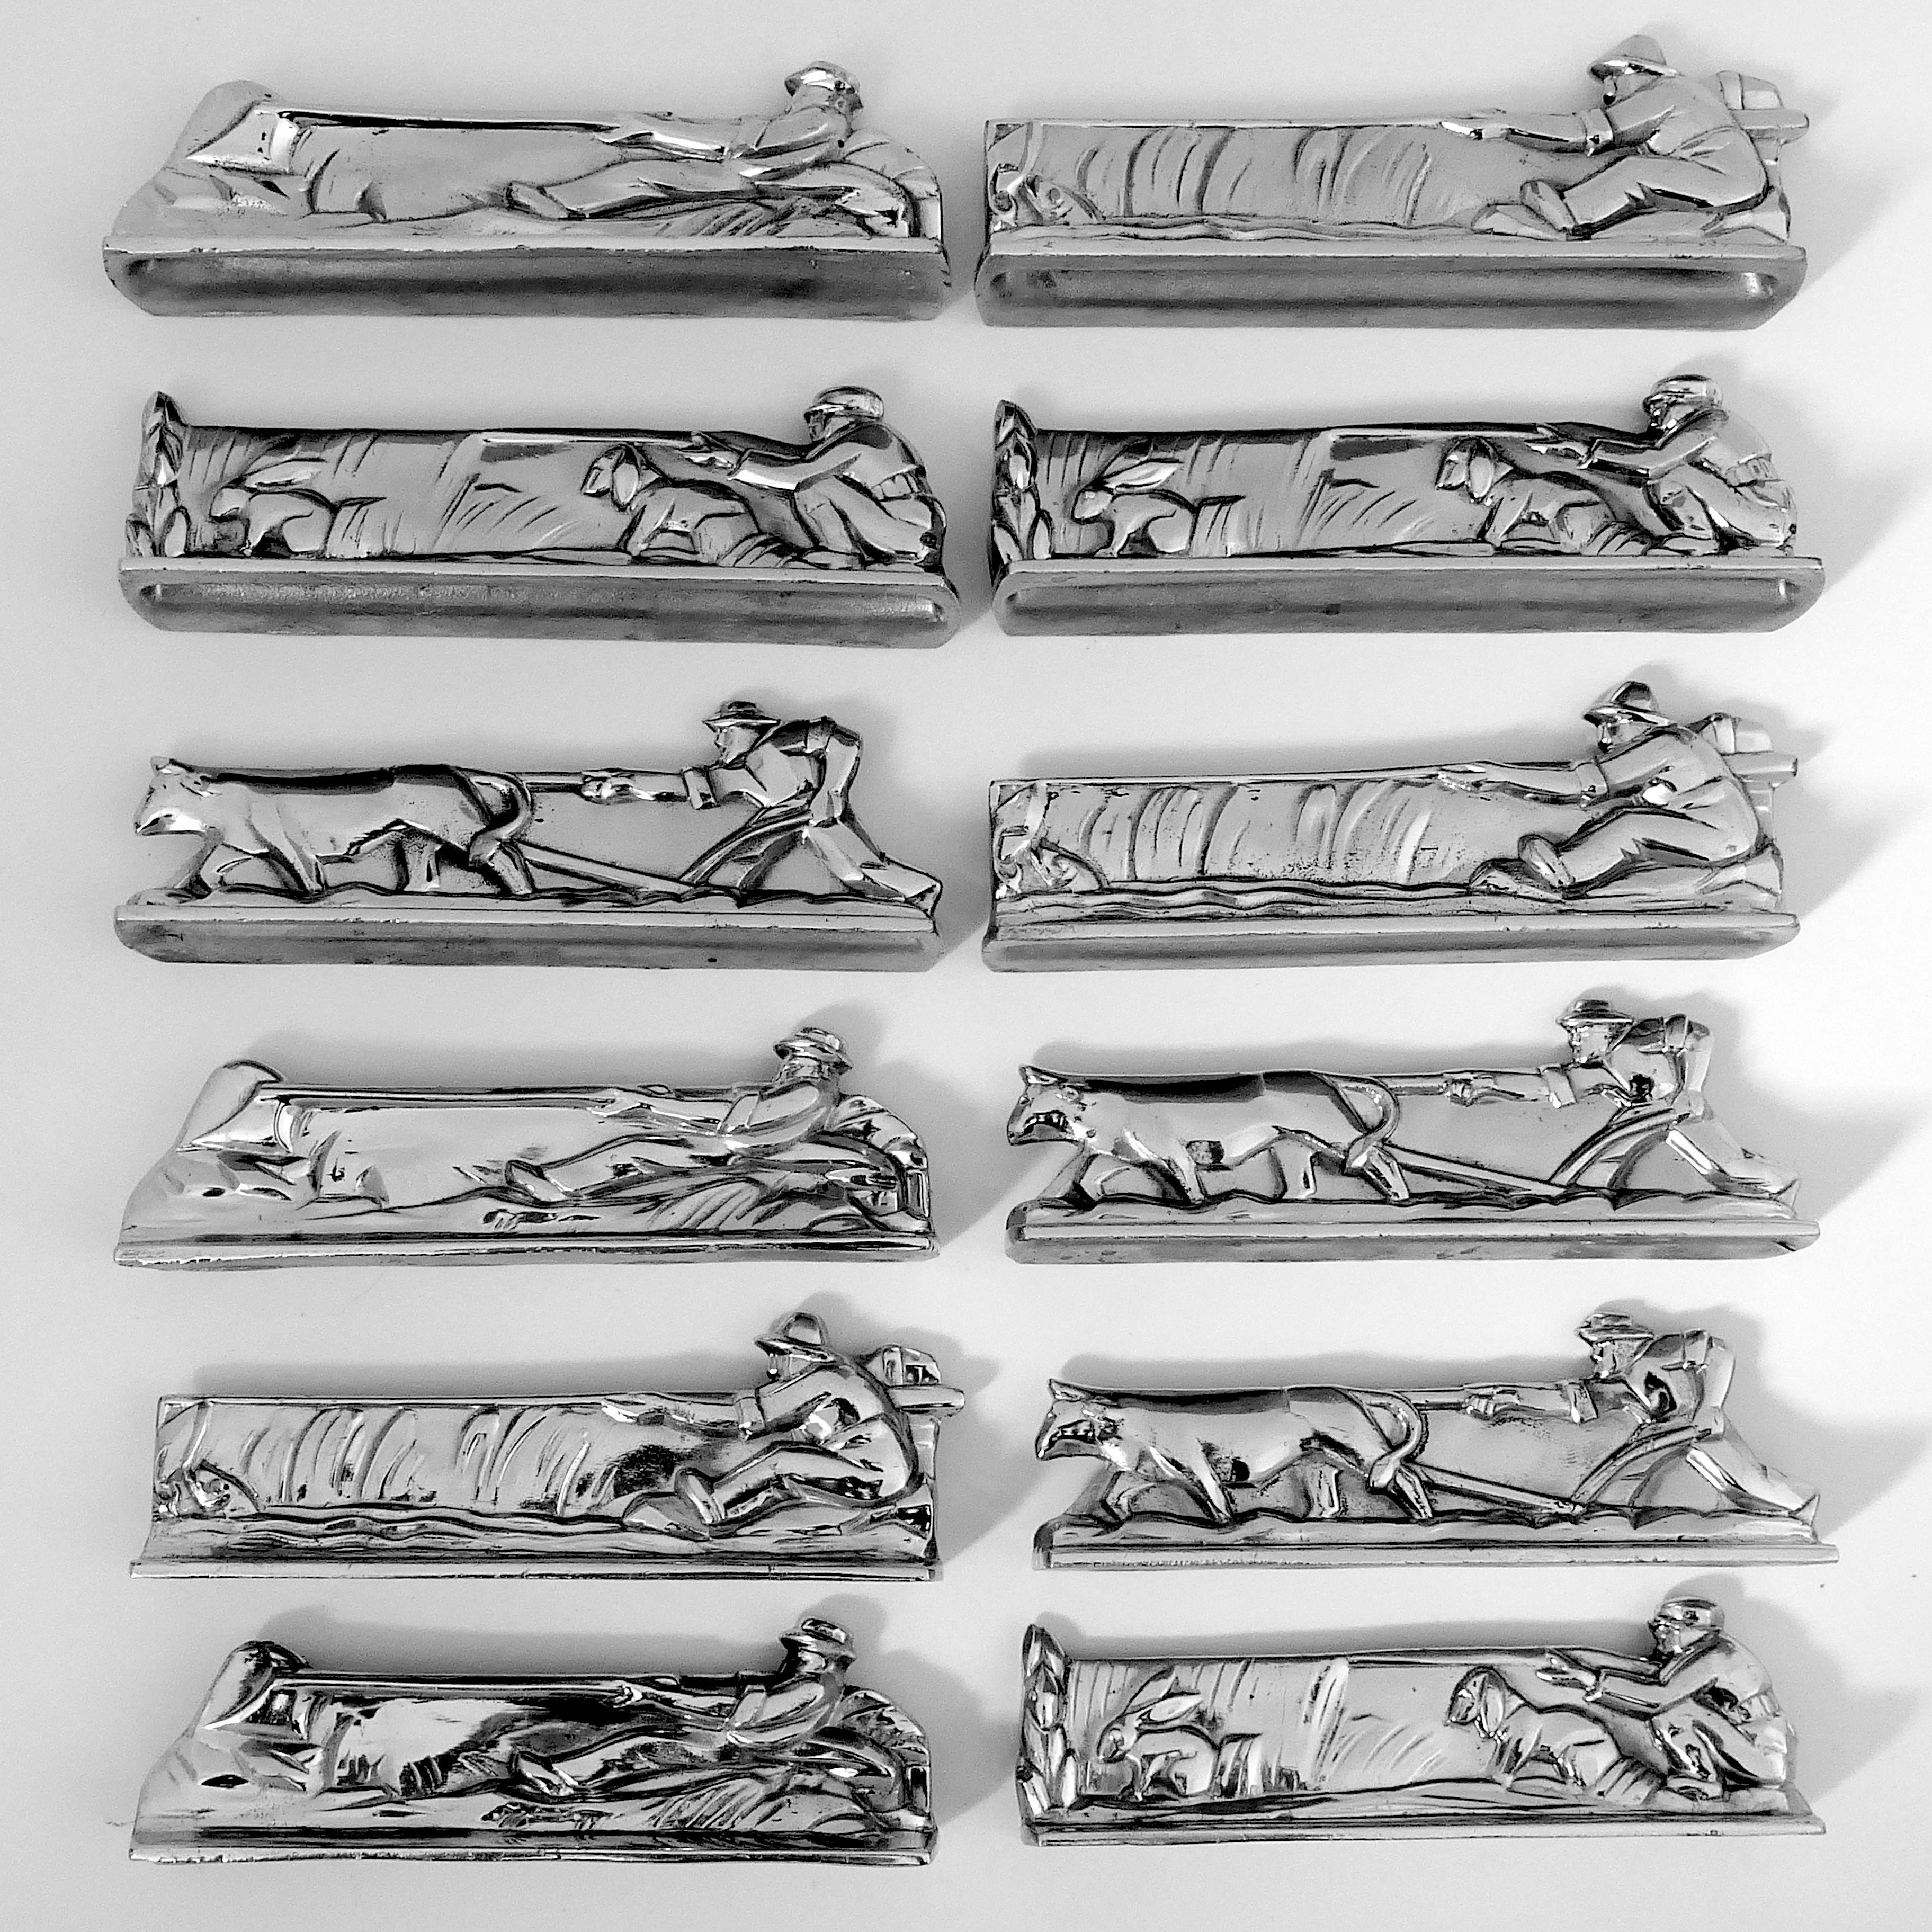 Rare set of twelve chrome-plated metal knife-rests representing scenes of hunting (3), fishing (6) and peasant plowing his field (3), circa 1920-1930. Unusual and fabulous, knife rests are identical by theme but each of the themes have two different